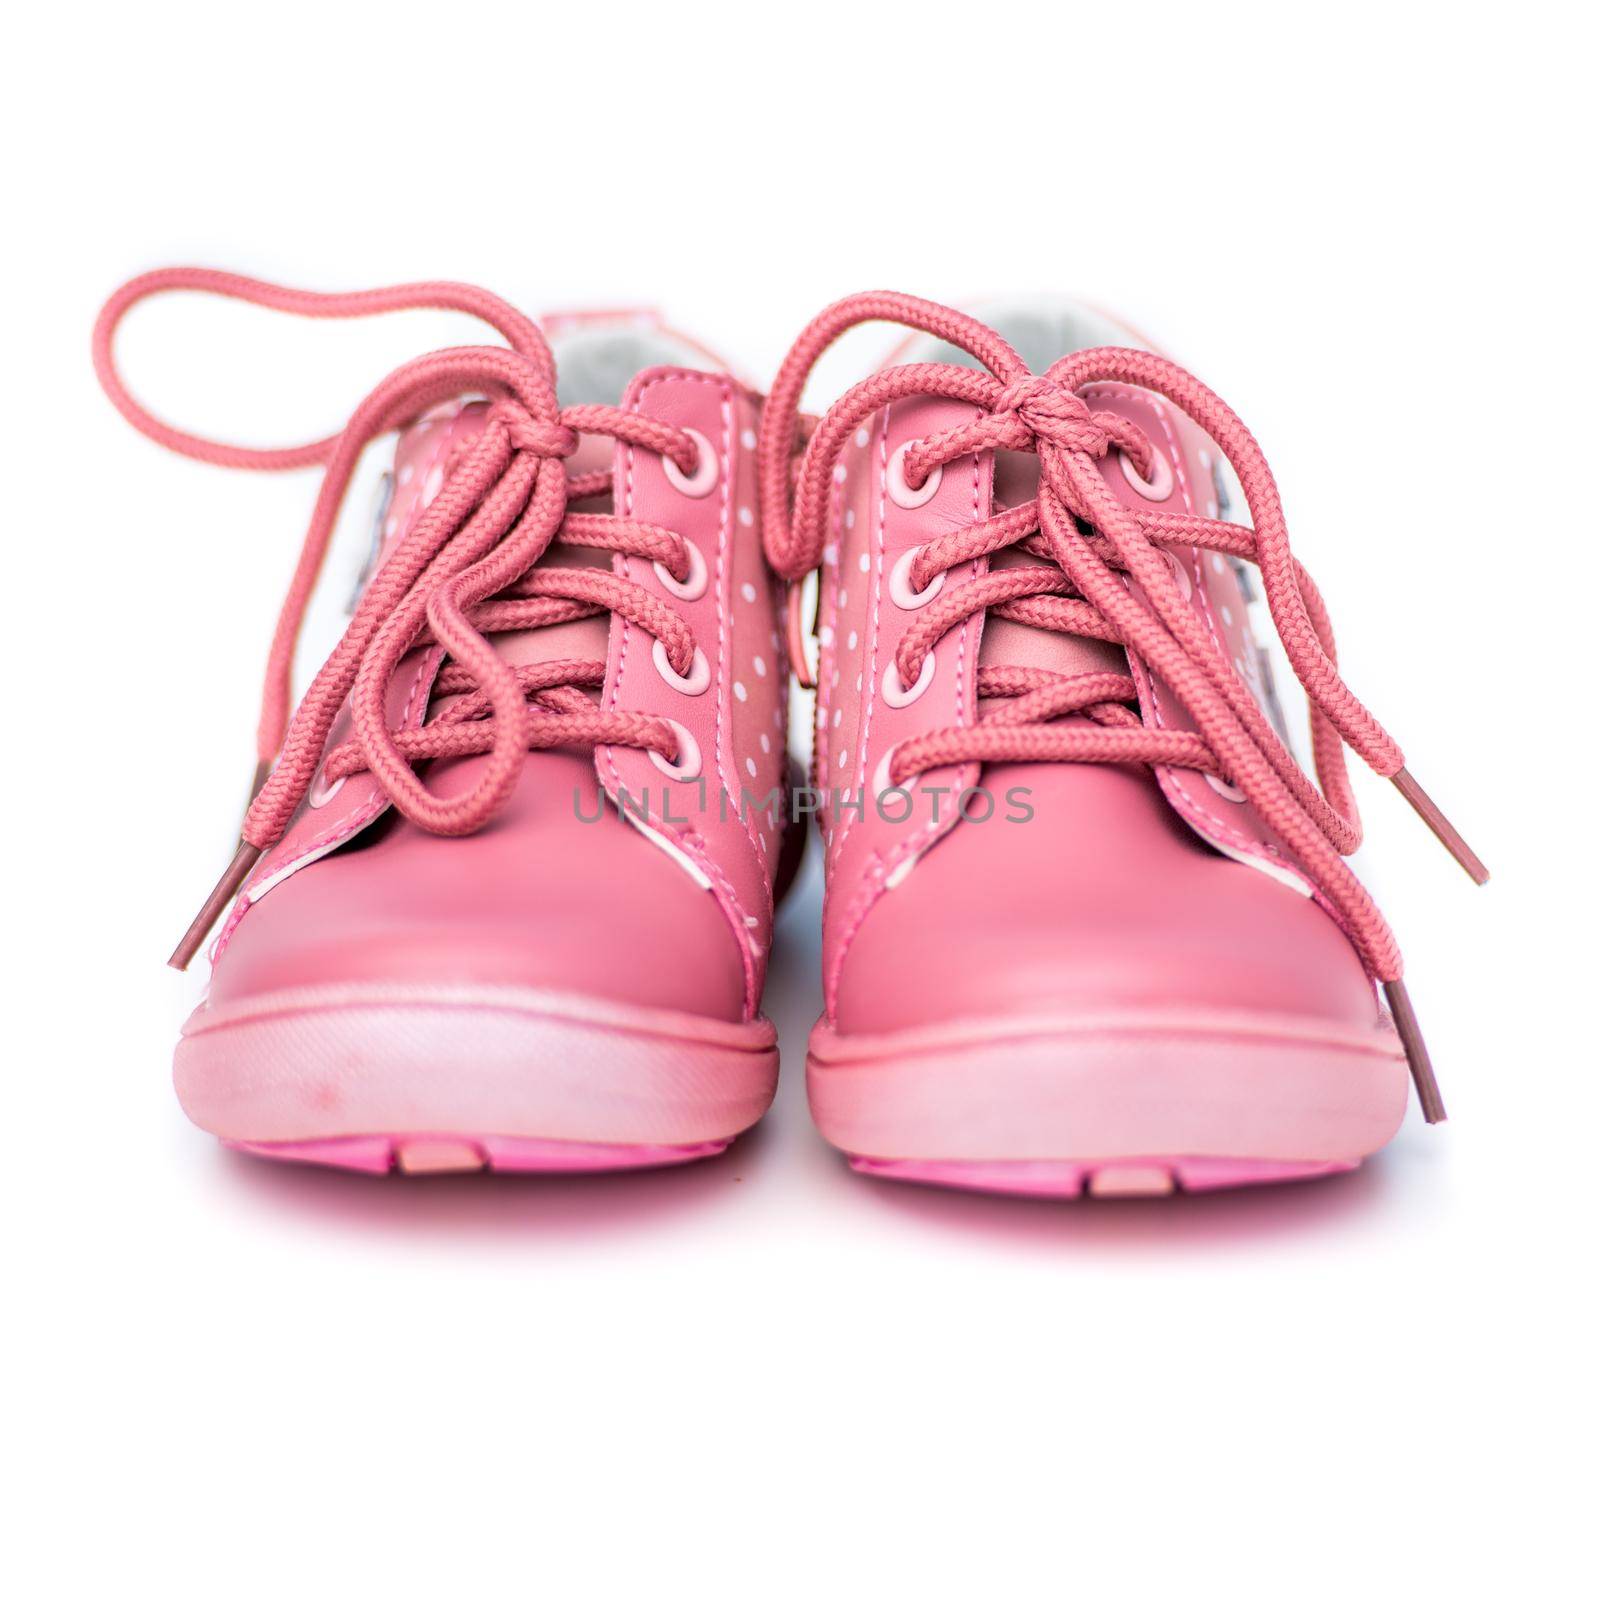 pink shoes for baby by tan4ikk1